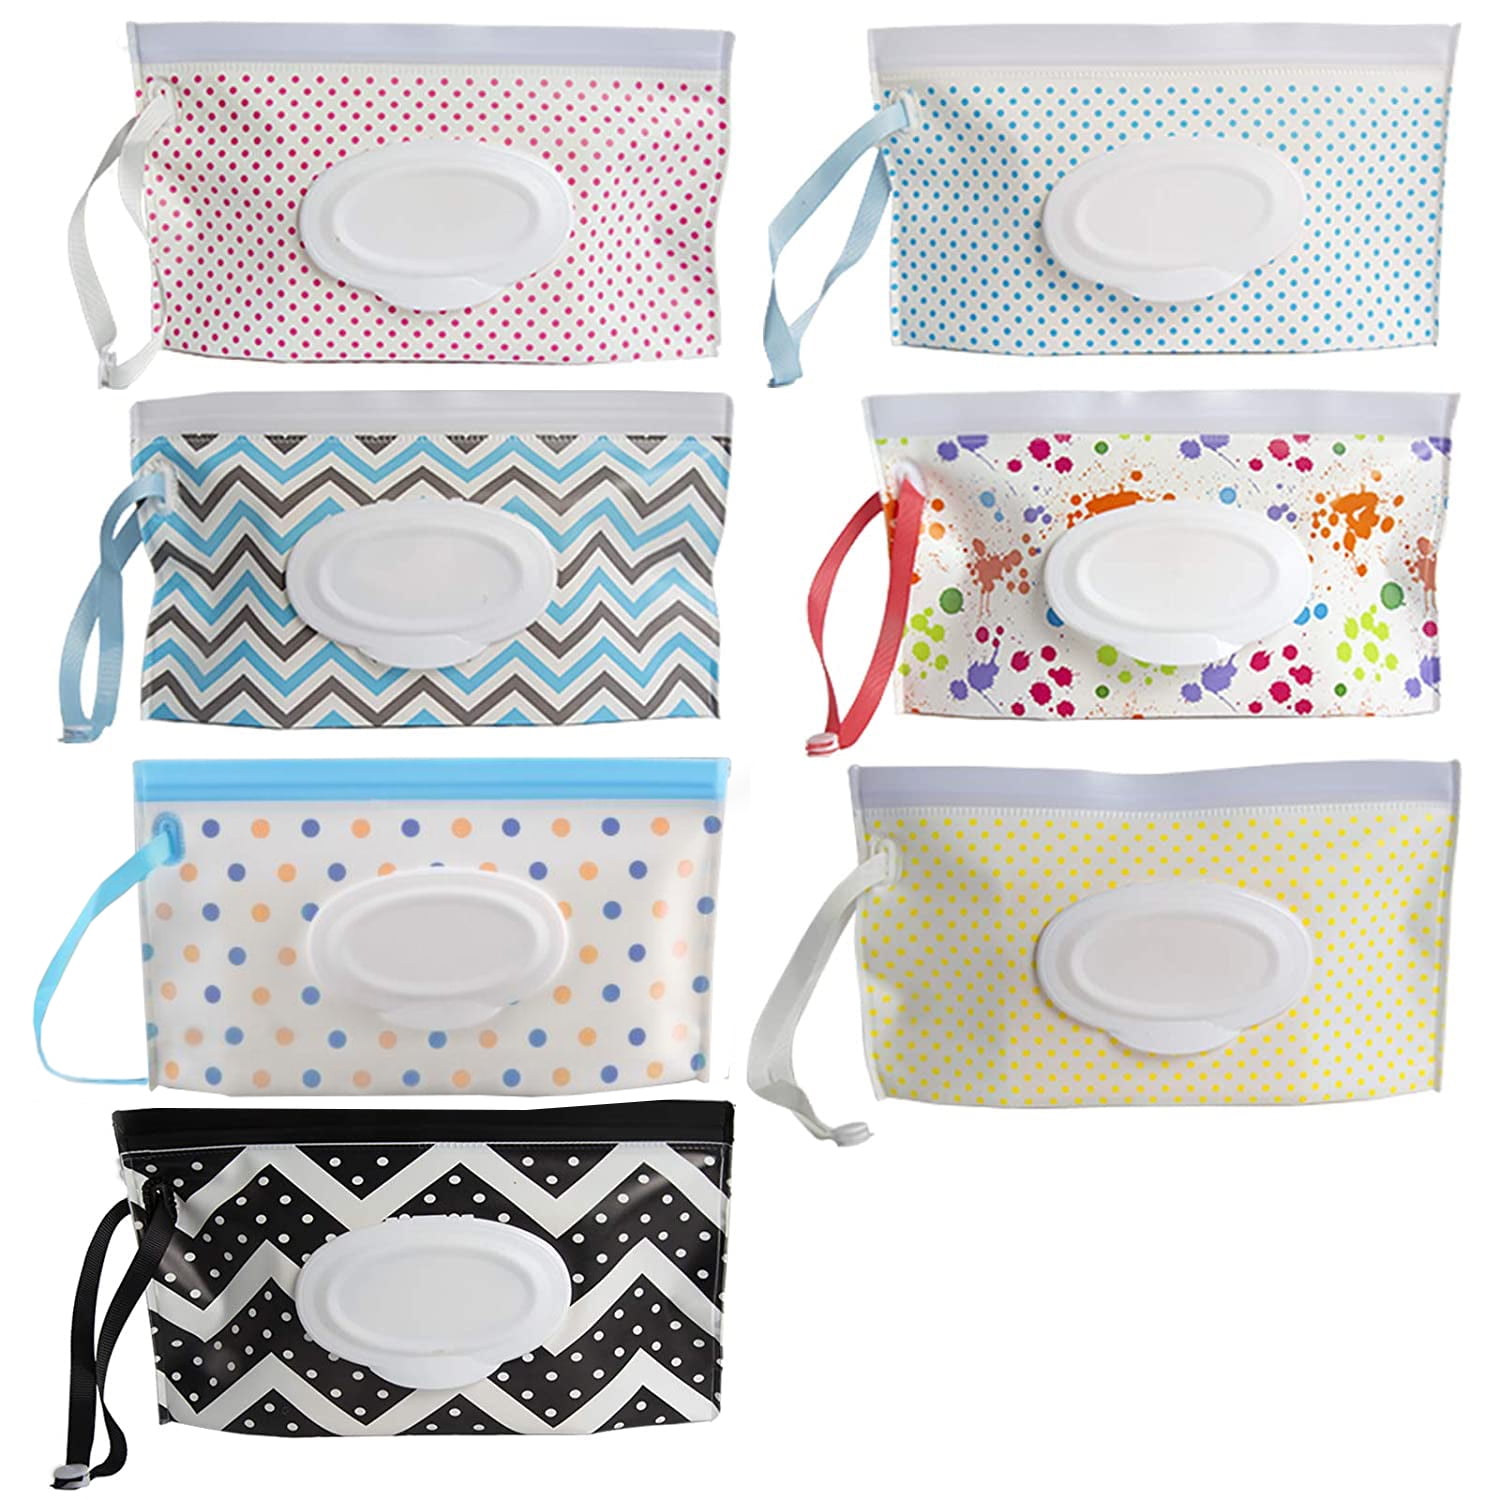 Travel Wipe Case Baby Wipe Case Ready to Ship